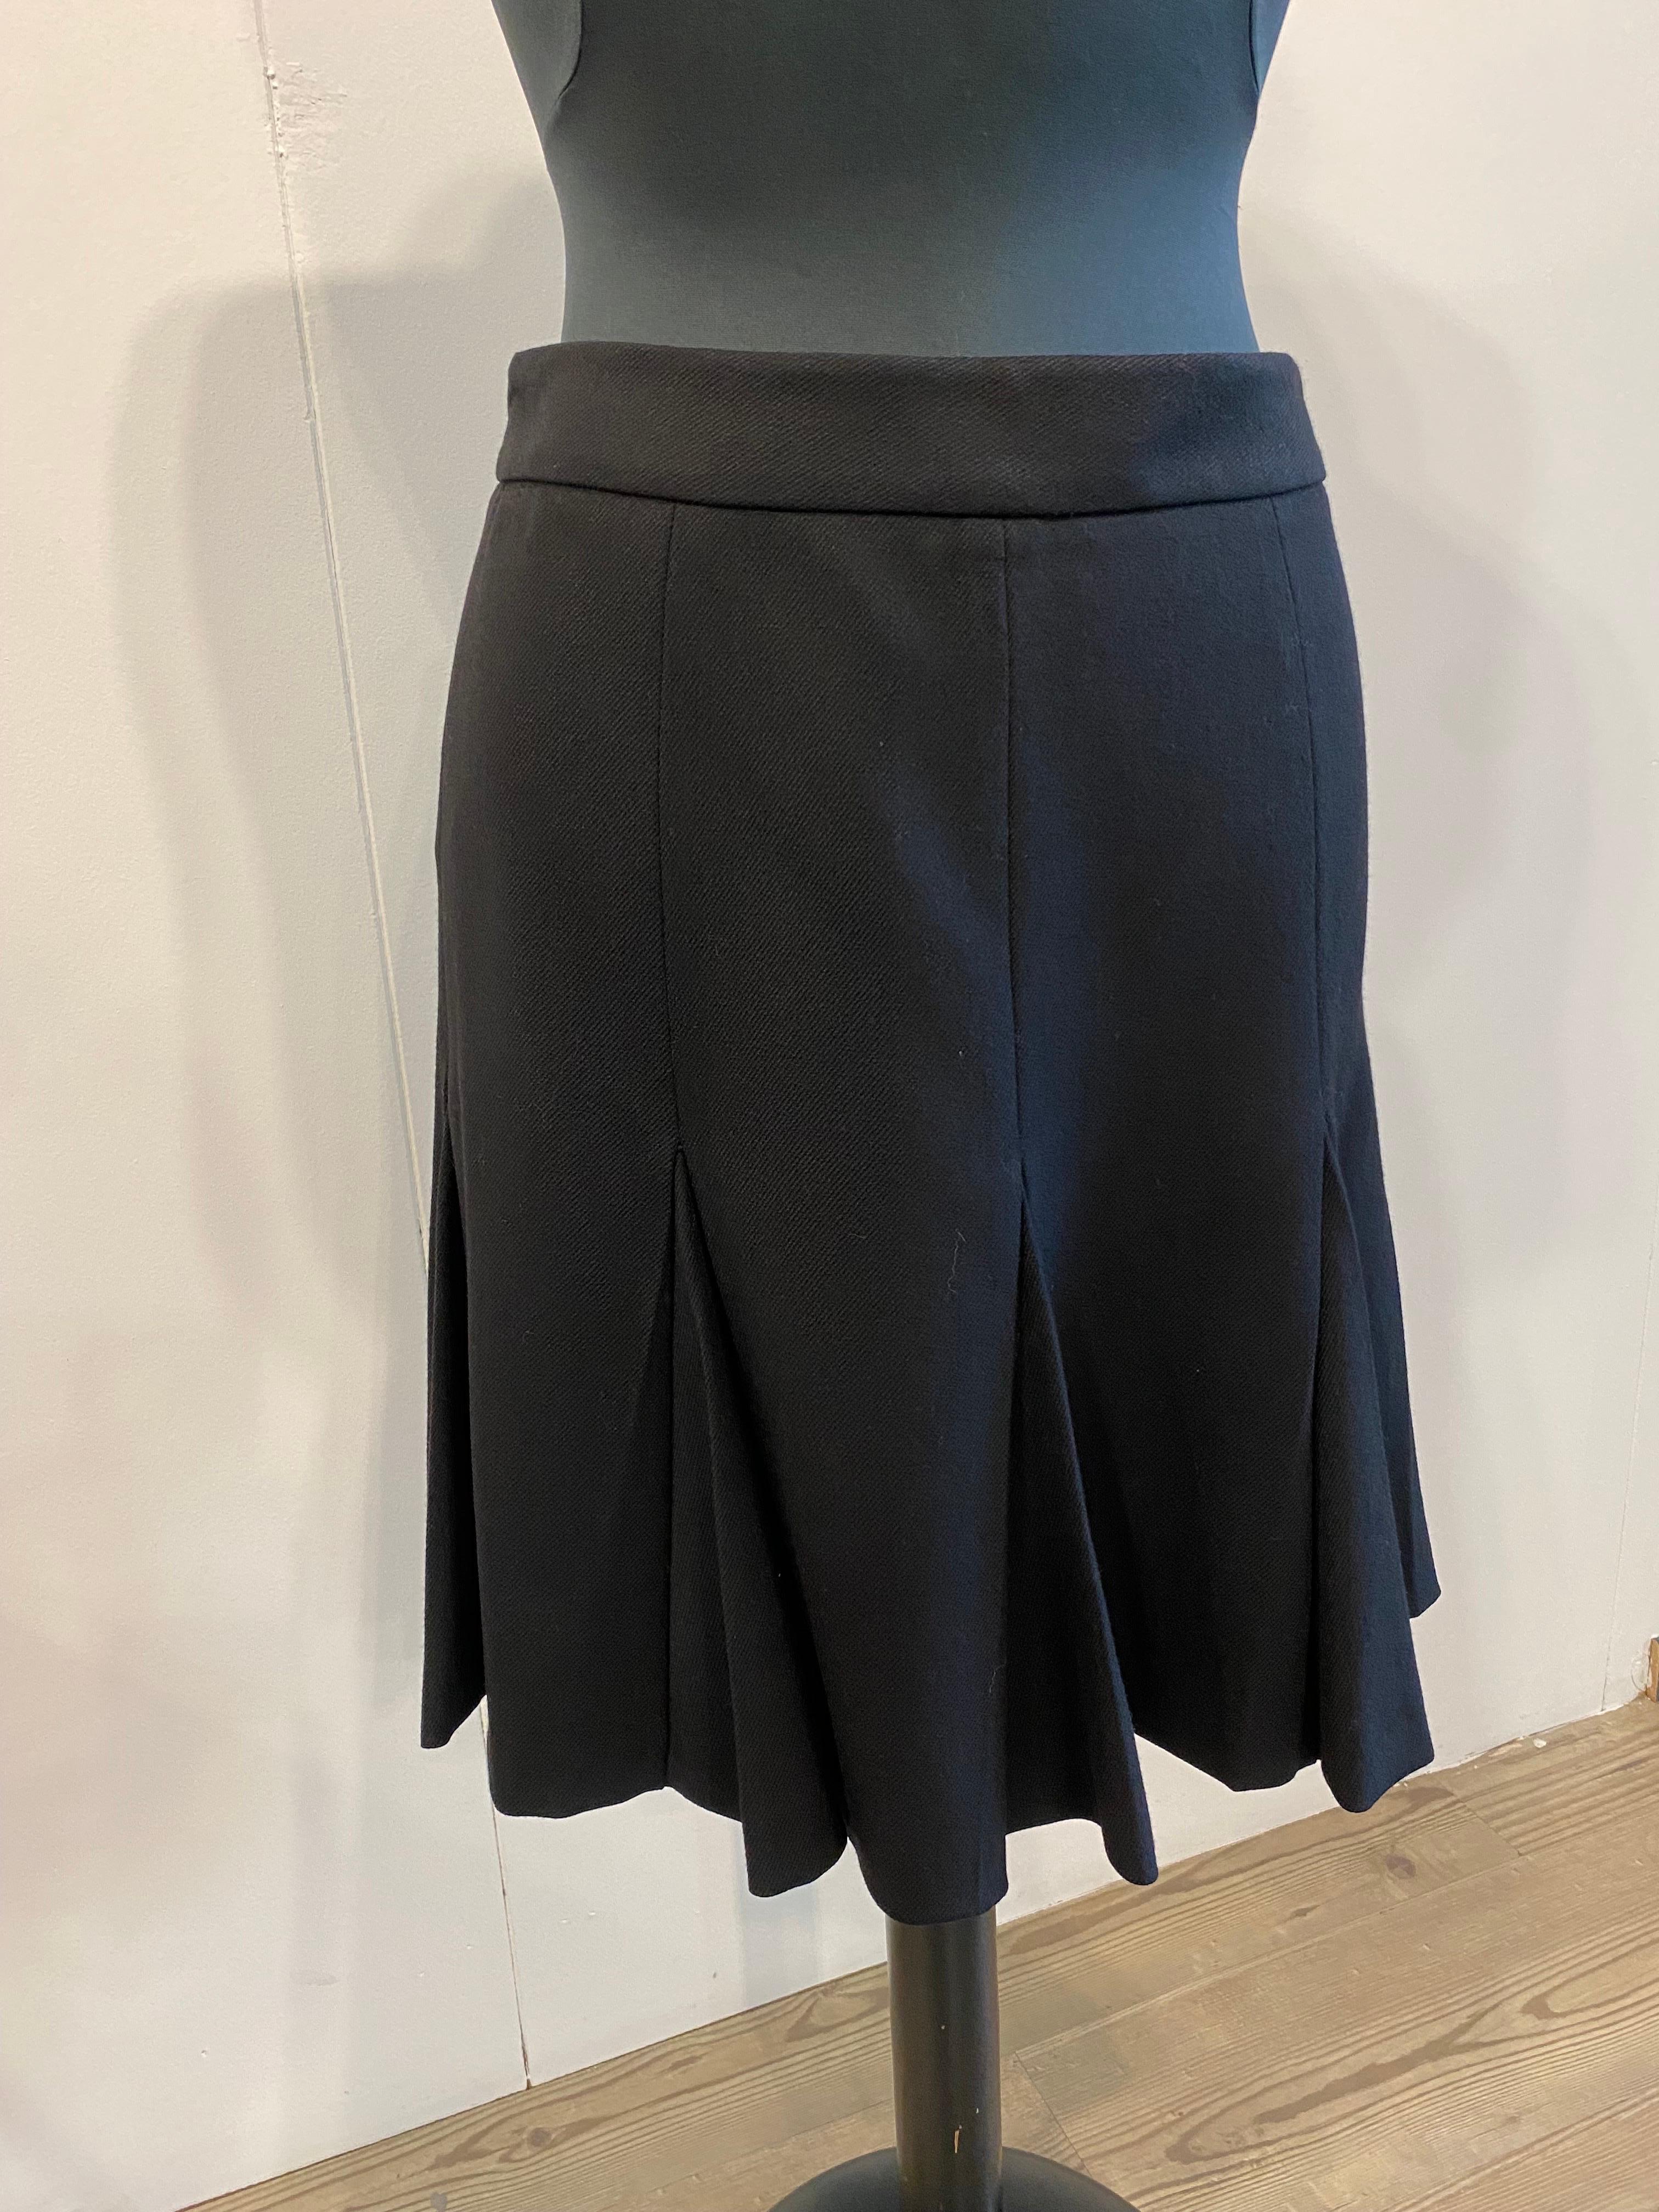 Black skirt Prada In Excellent Condition For Sale In Carnate, IT